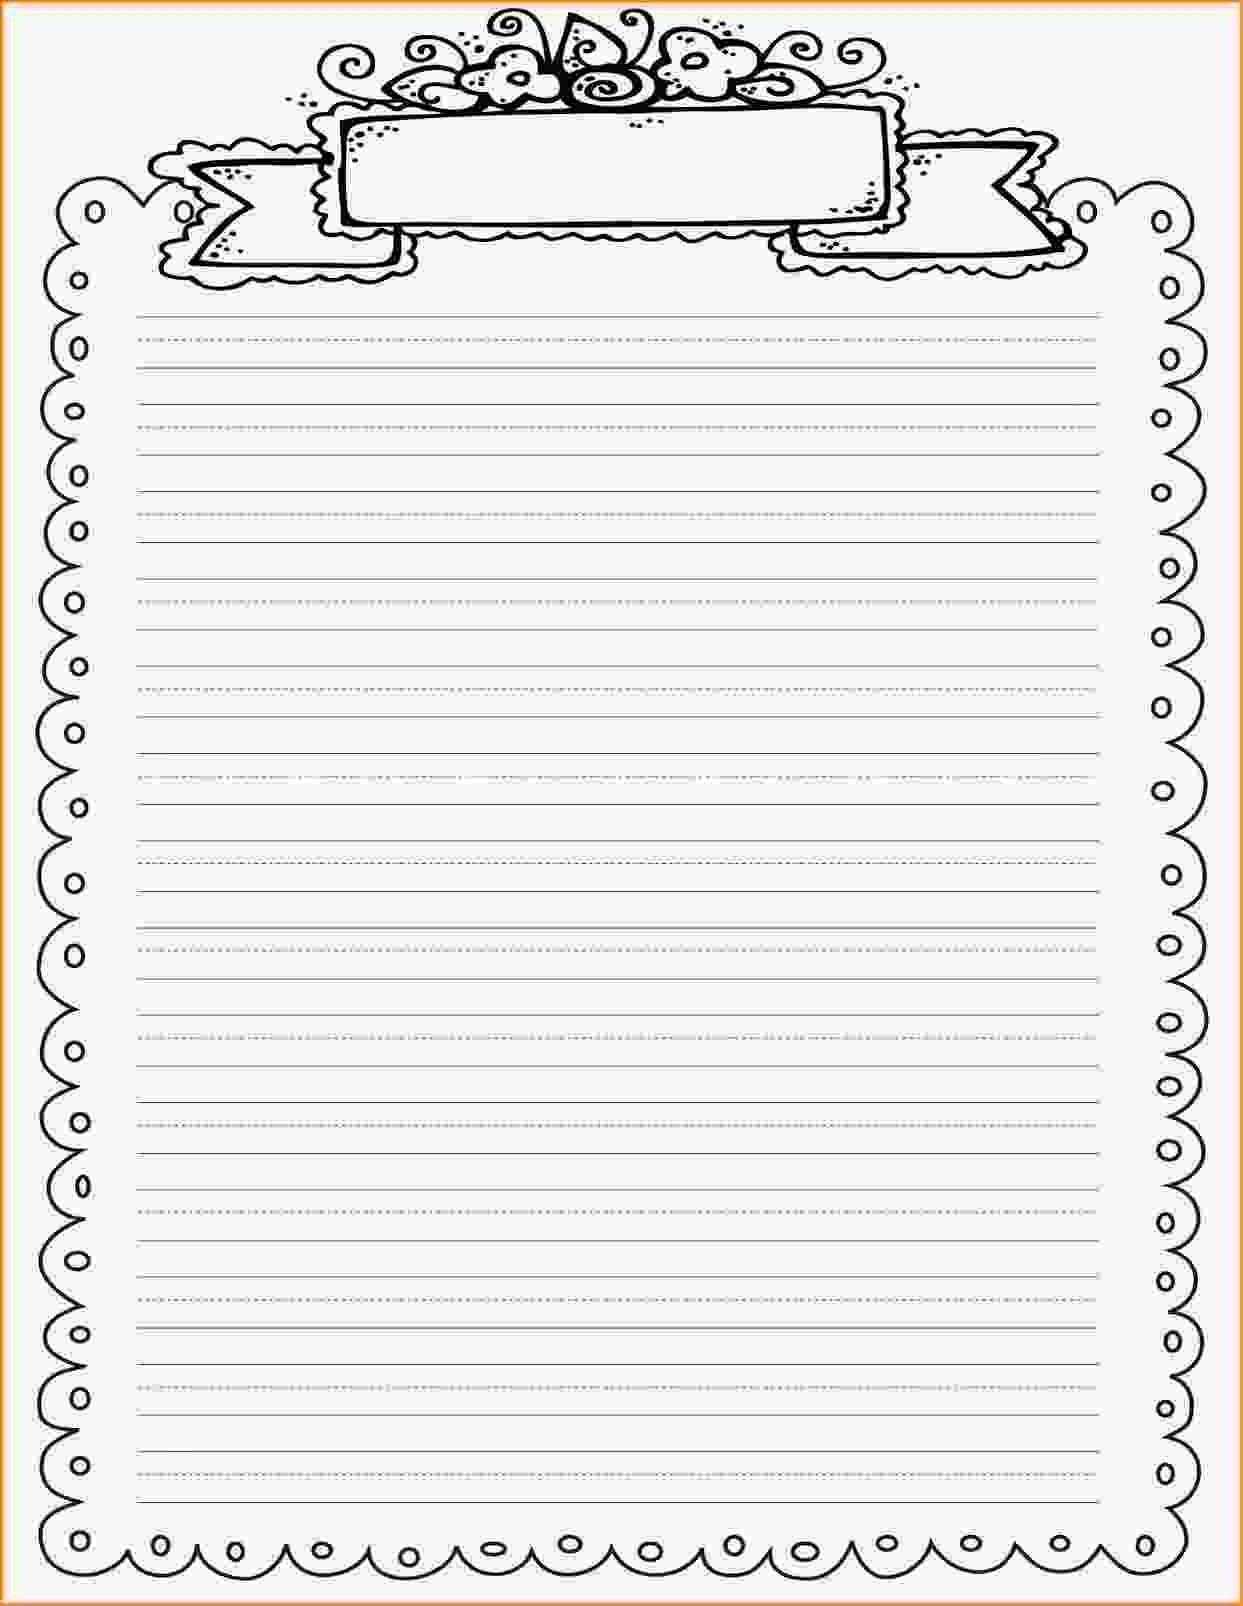 full-page-printable-lined-paper-printable-blank-world